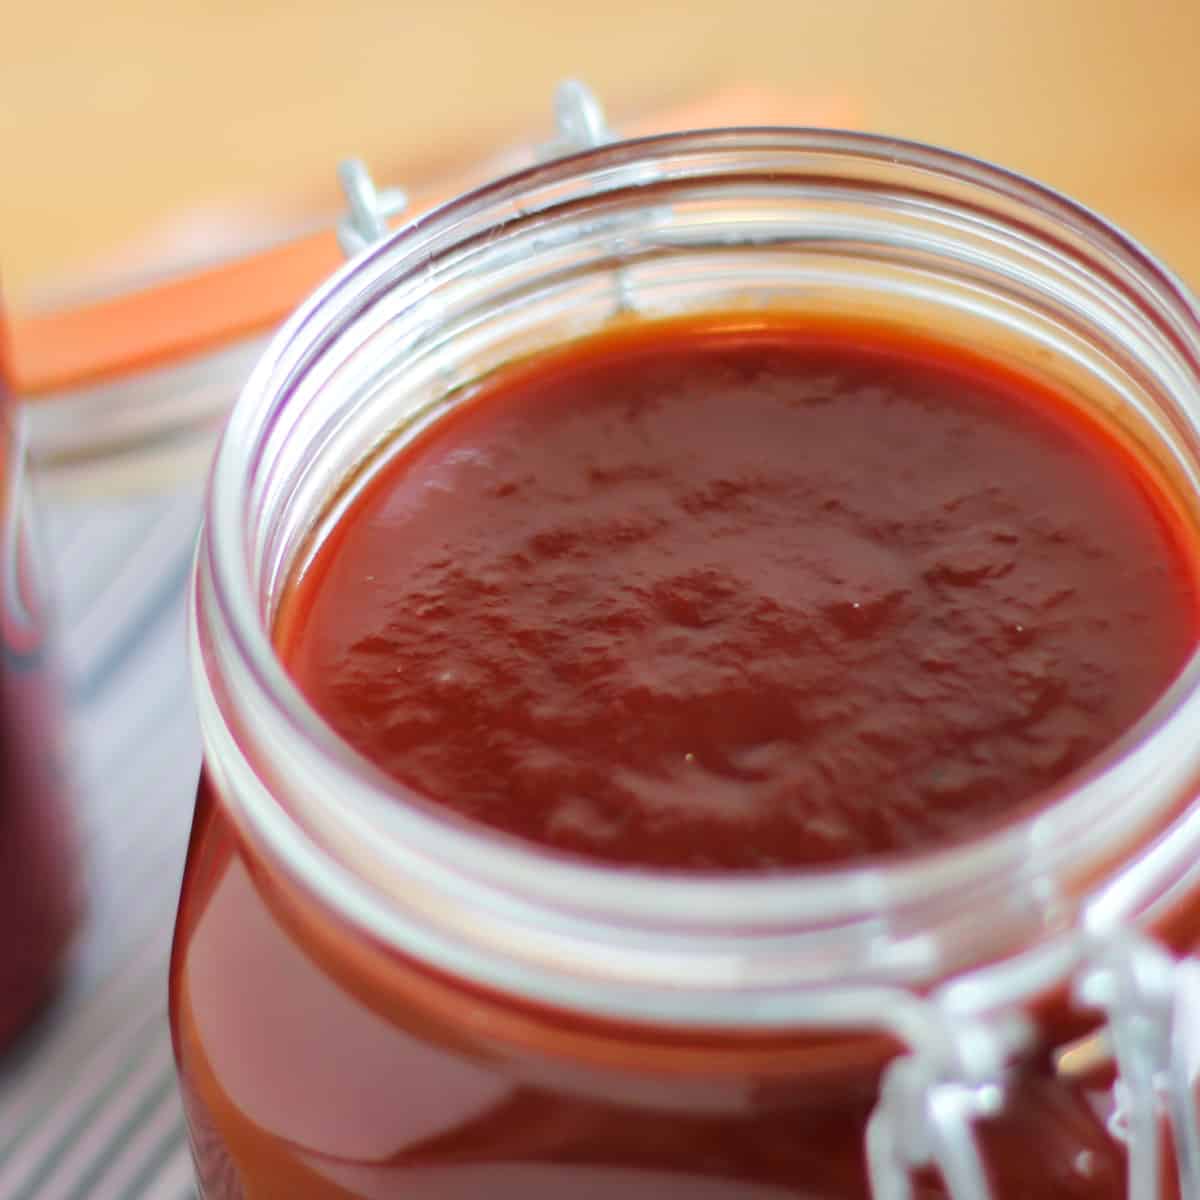 A close up picture of a jar of 
BBQ sauce.